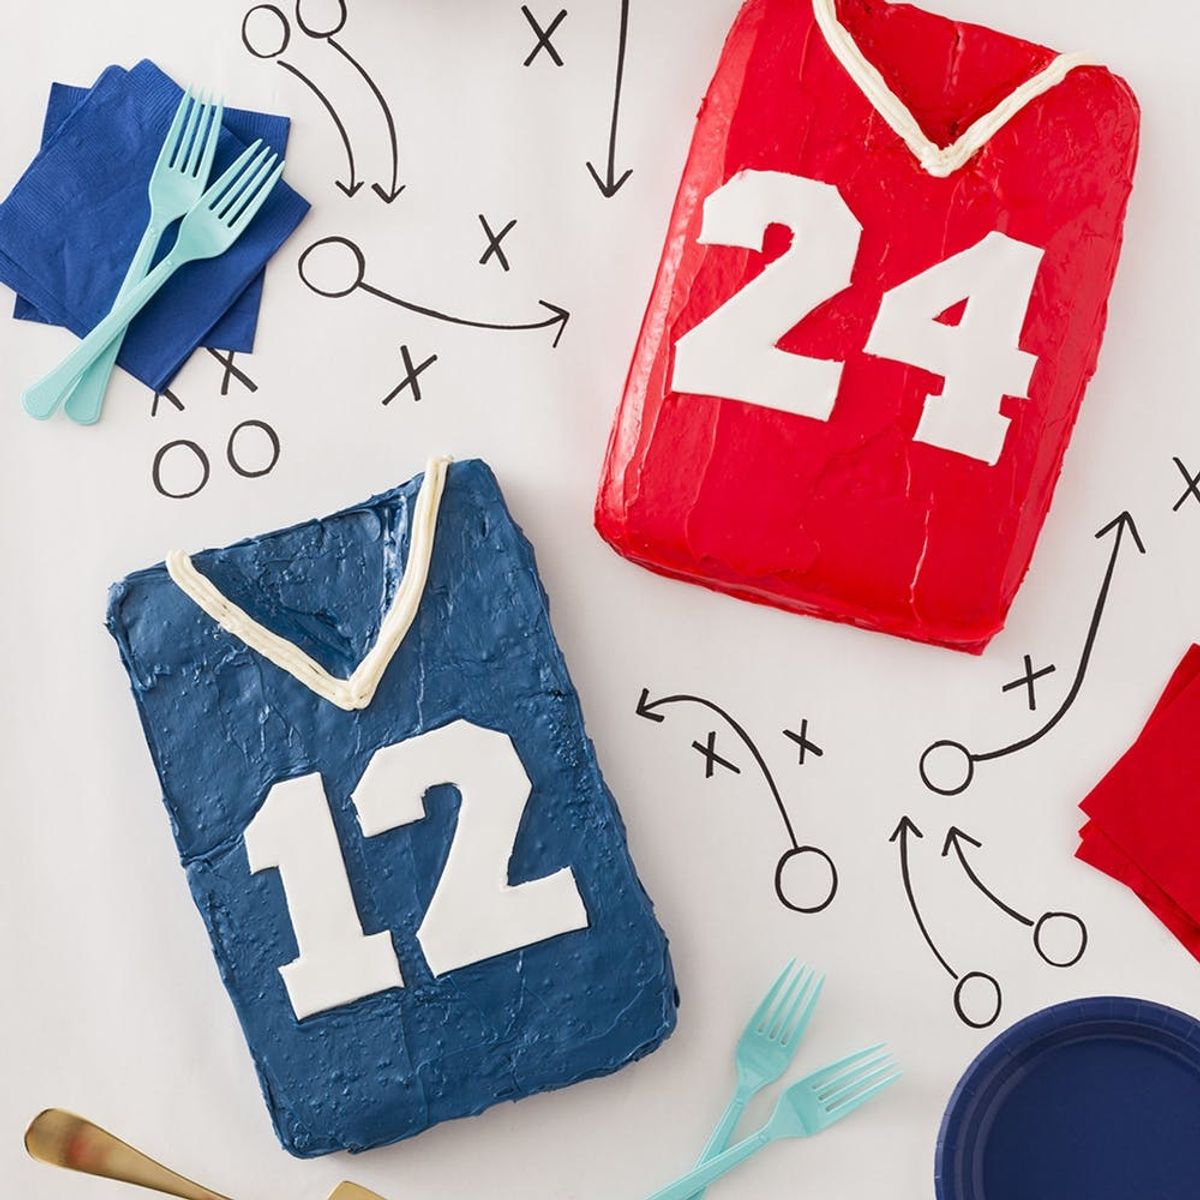 Score a Touchdown at Your Super Bowl Party With Football Jersey Cakes